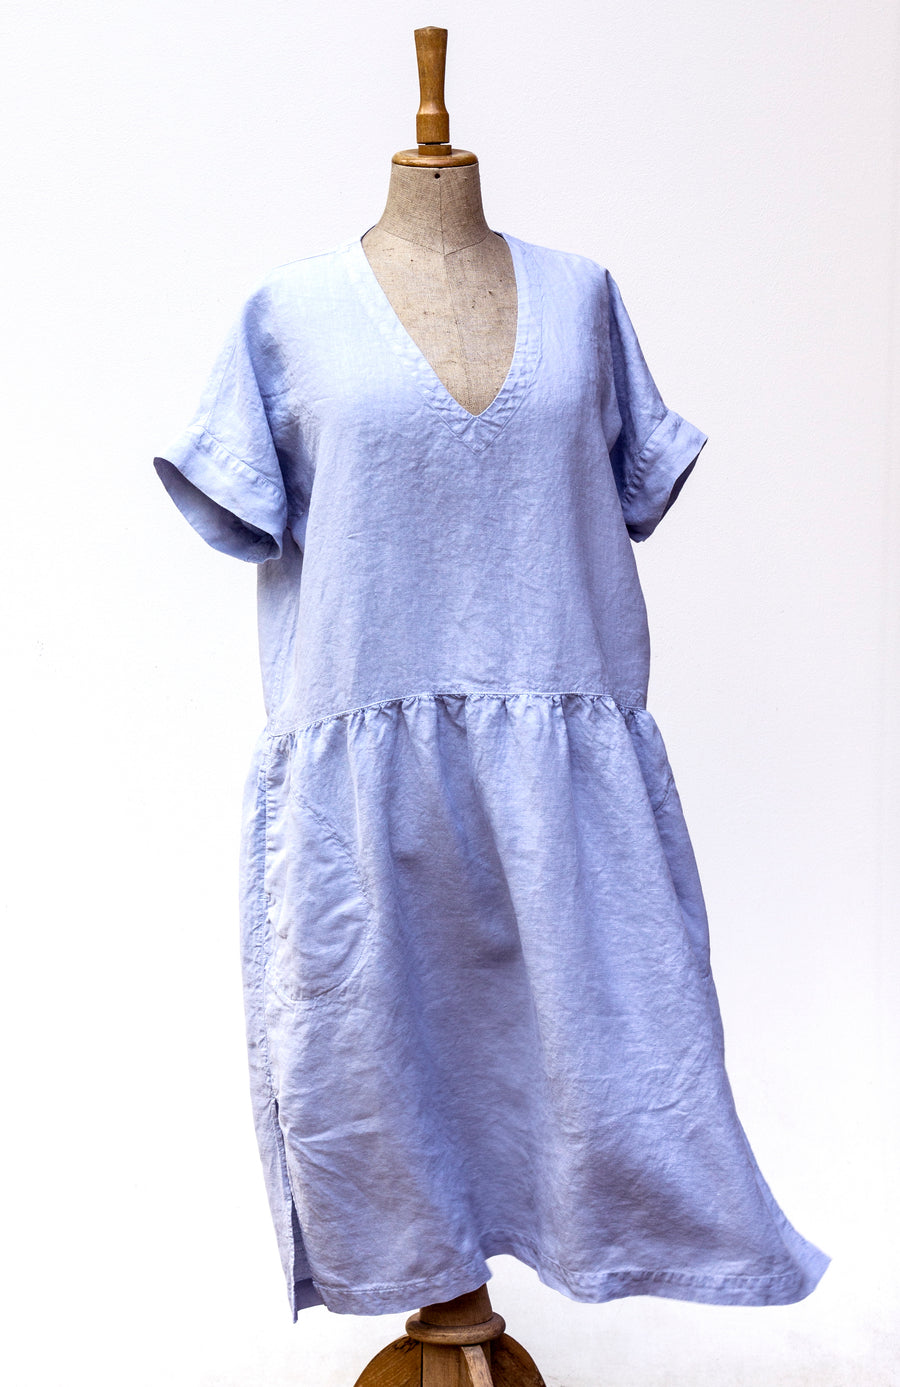 Country dress made of extra fine linen in Wedgewood shade